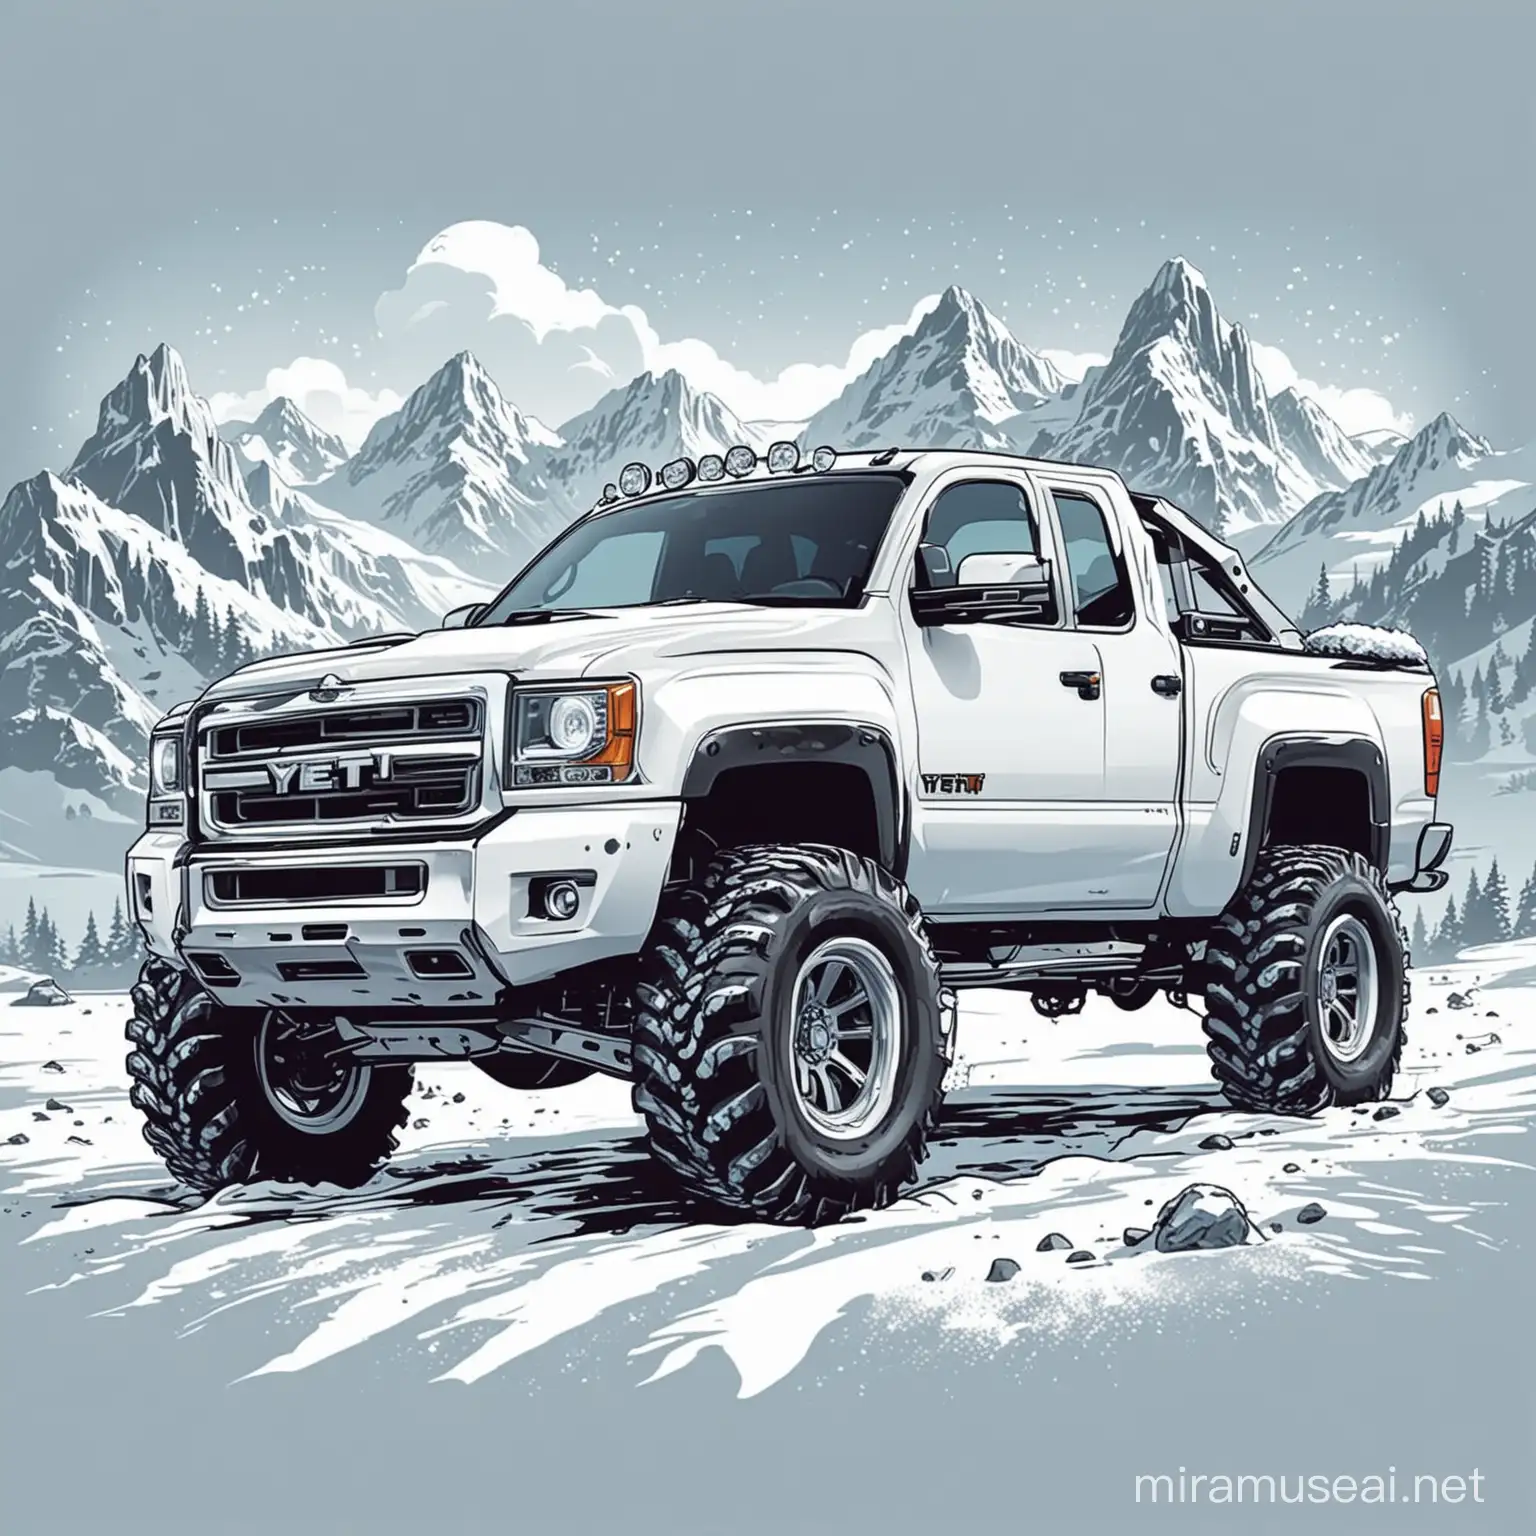 Bigfoot Encounter White Pickup Truck in Snowy Wilderness Comic Style Vector Art for Tshirt Print